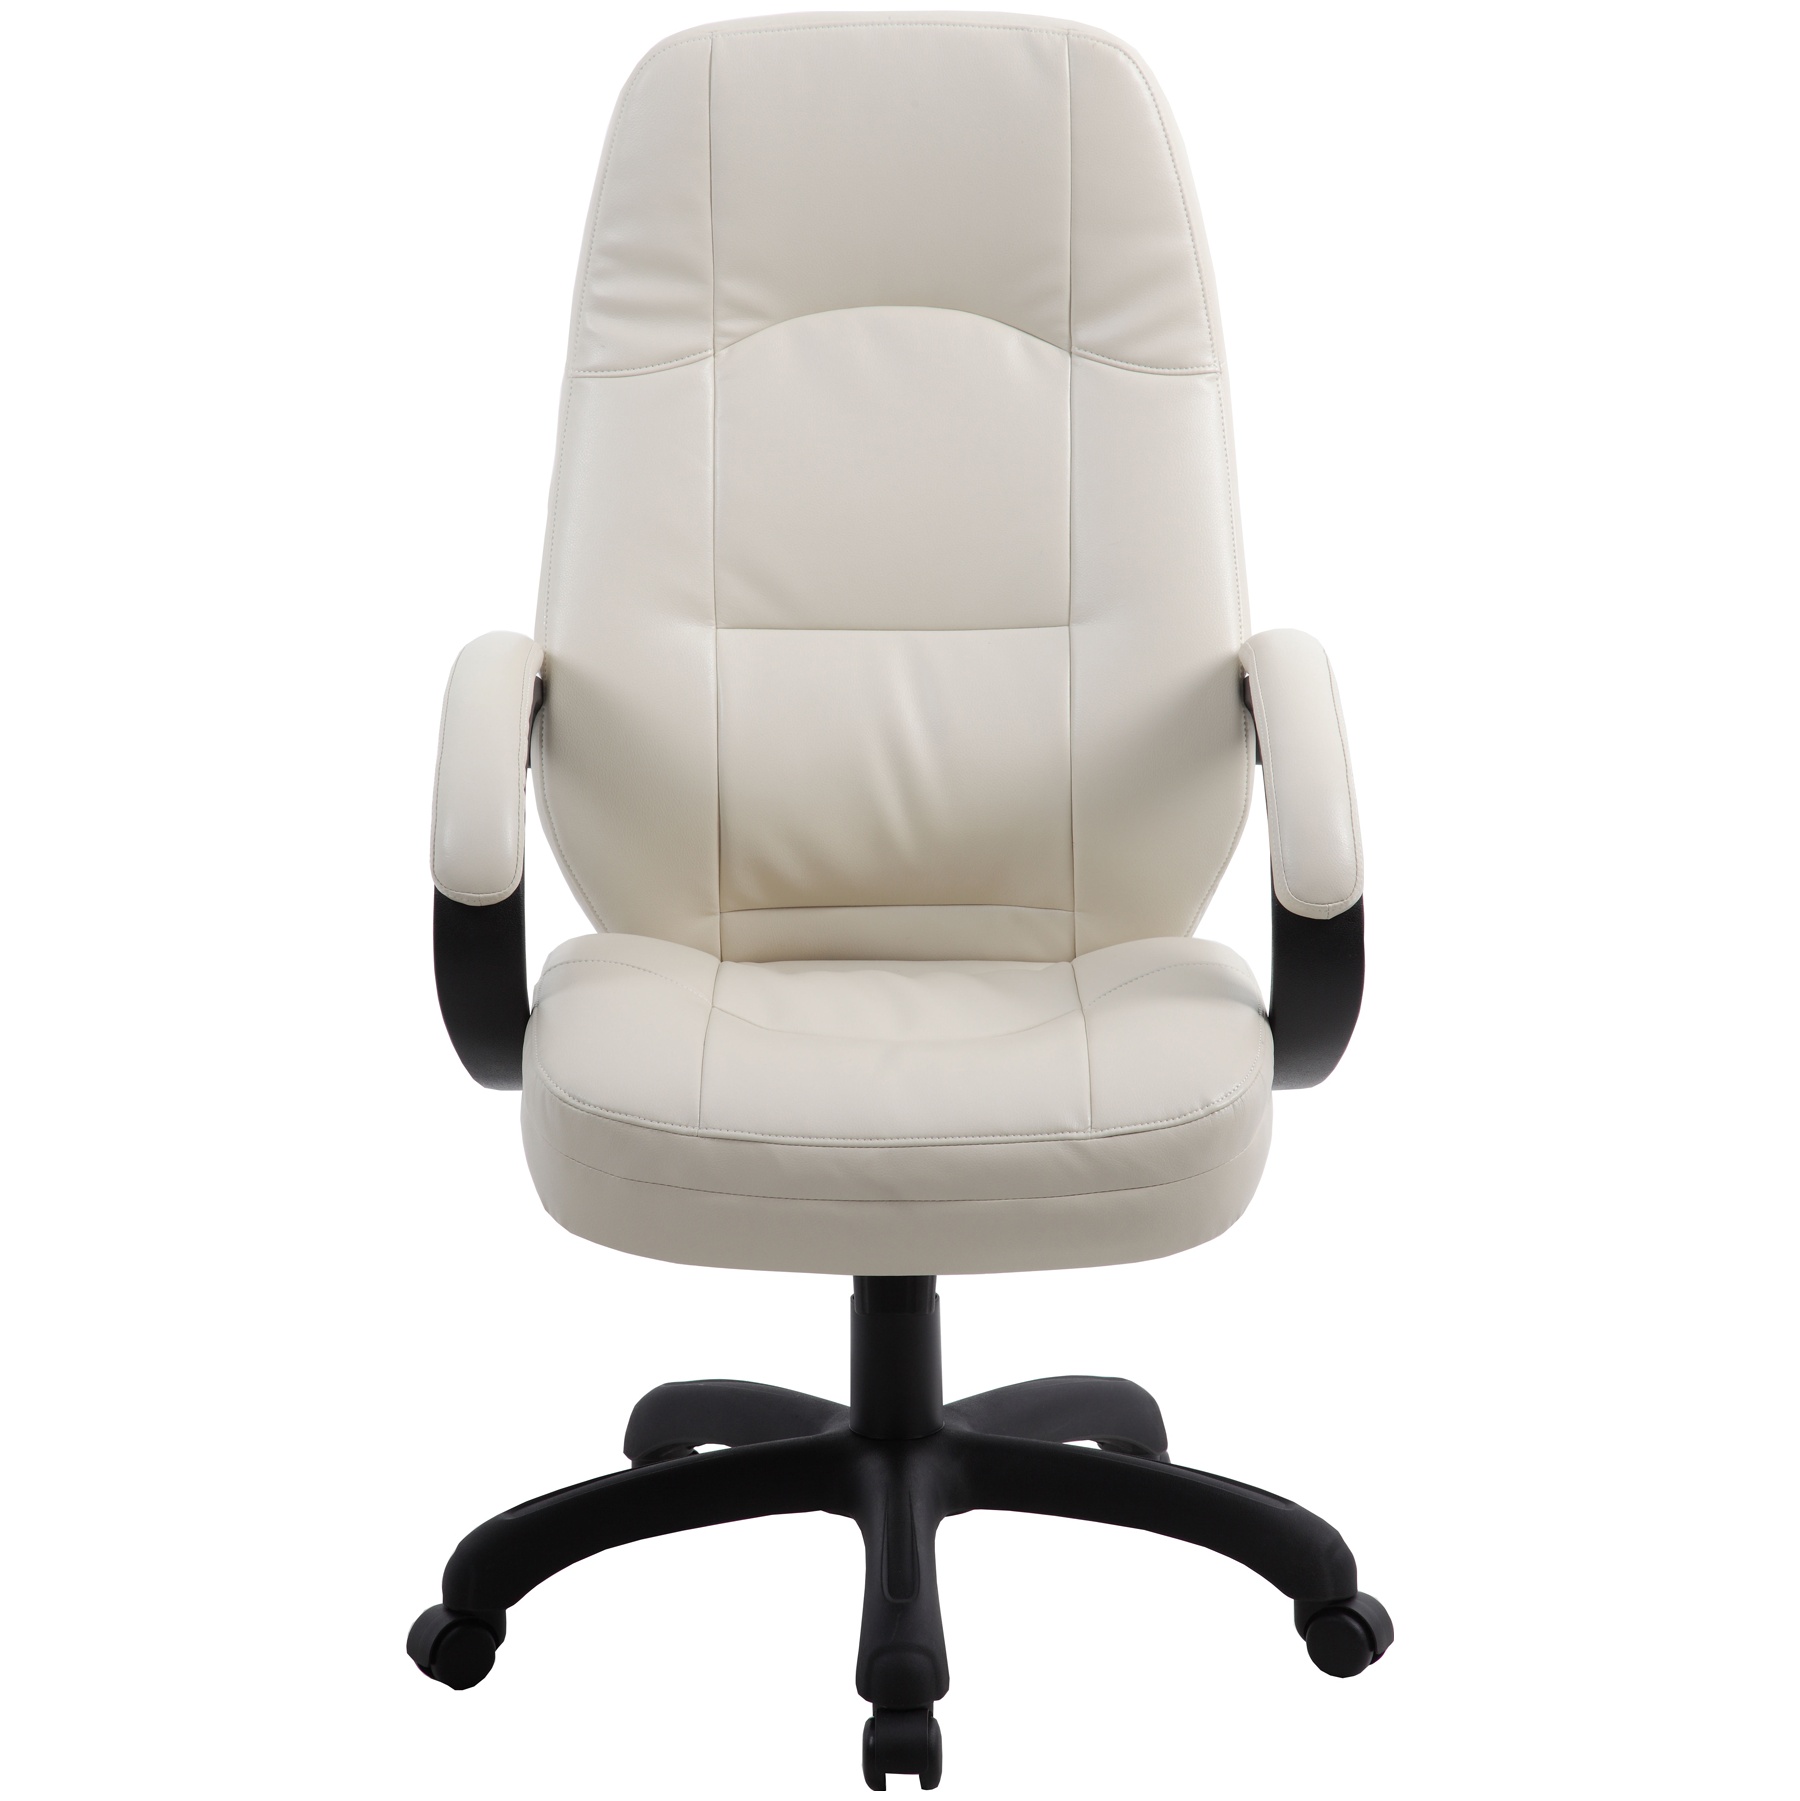 New High Back Leather Office Chair Executive Office Desk Task Computer Chair O10 